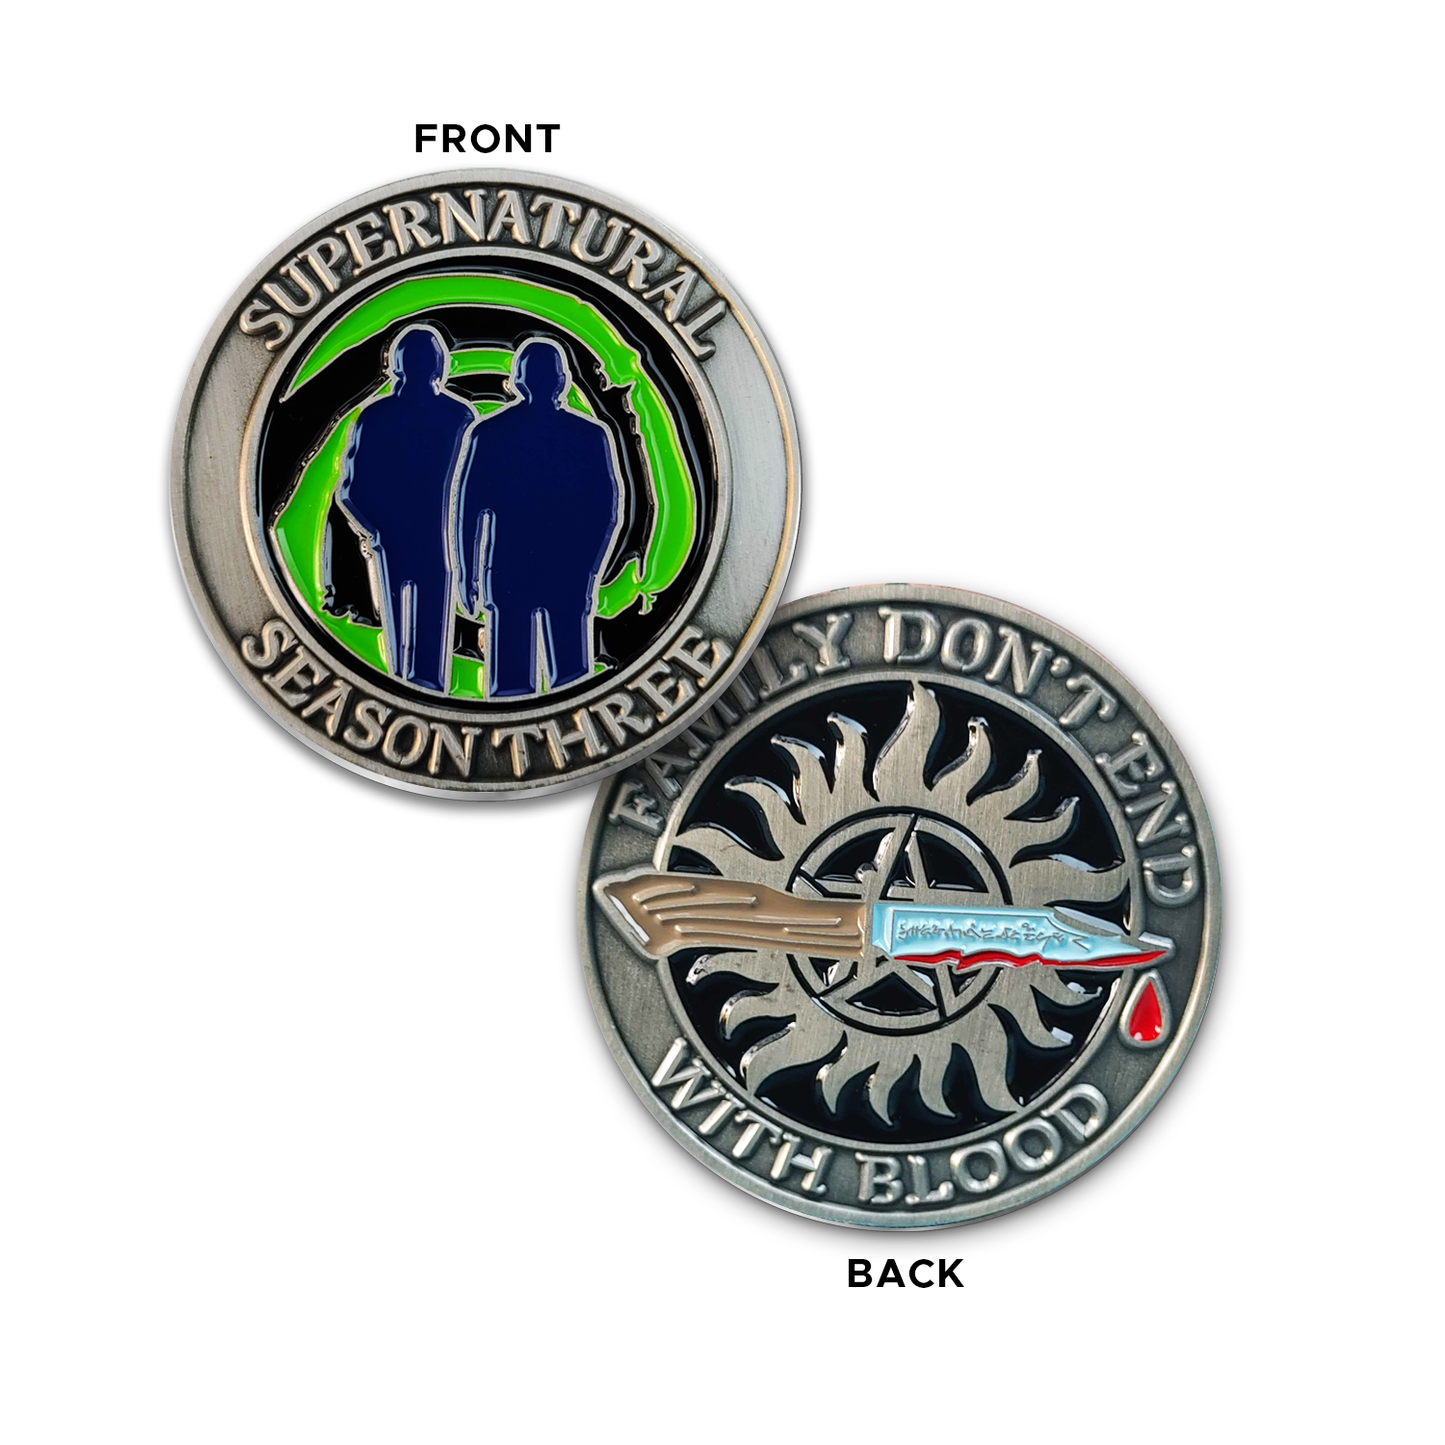 A brass coin with "Supernatural season three", a green "Mystery Spot" swirl, and 2 male sillhouettes on one side and "Family Don't End With Blood" with a knife and anti-possession symbol on the other.